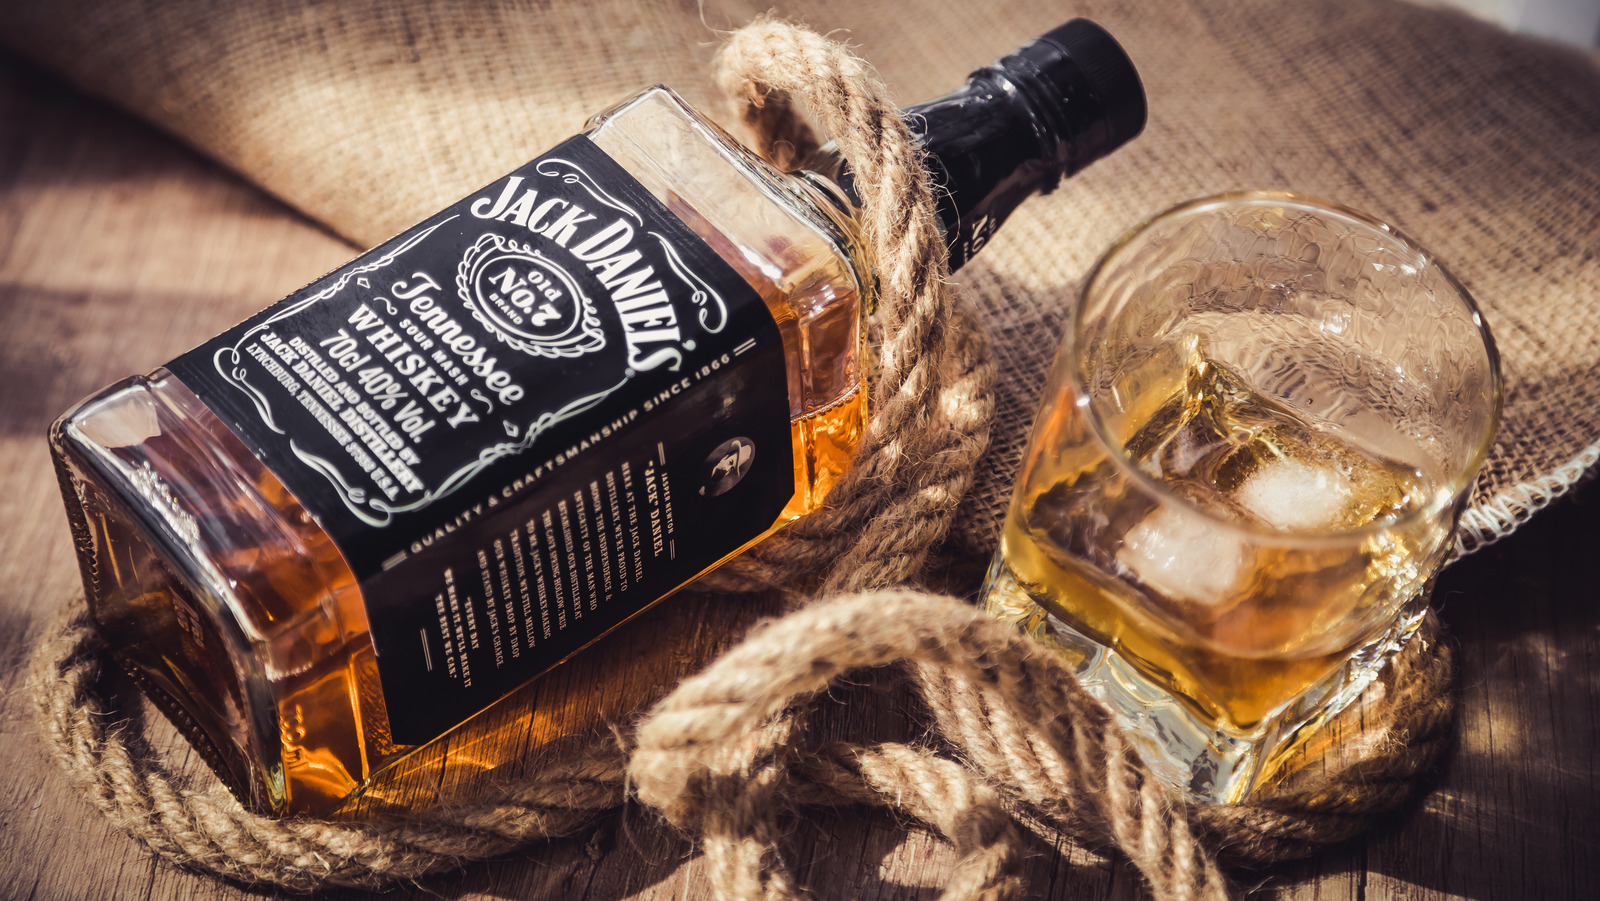 https://www.tastingtable.com/img/gallery/jack-daniels-old-no-7-tennessee-whiskey-the-ultimate-bottle-guide/l-intro-1682098341.jpg